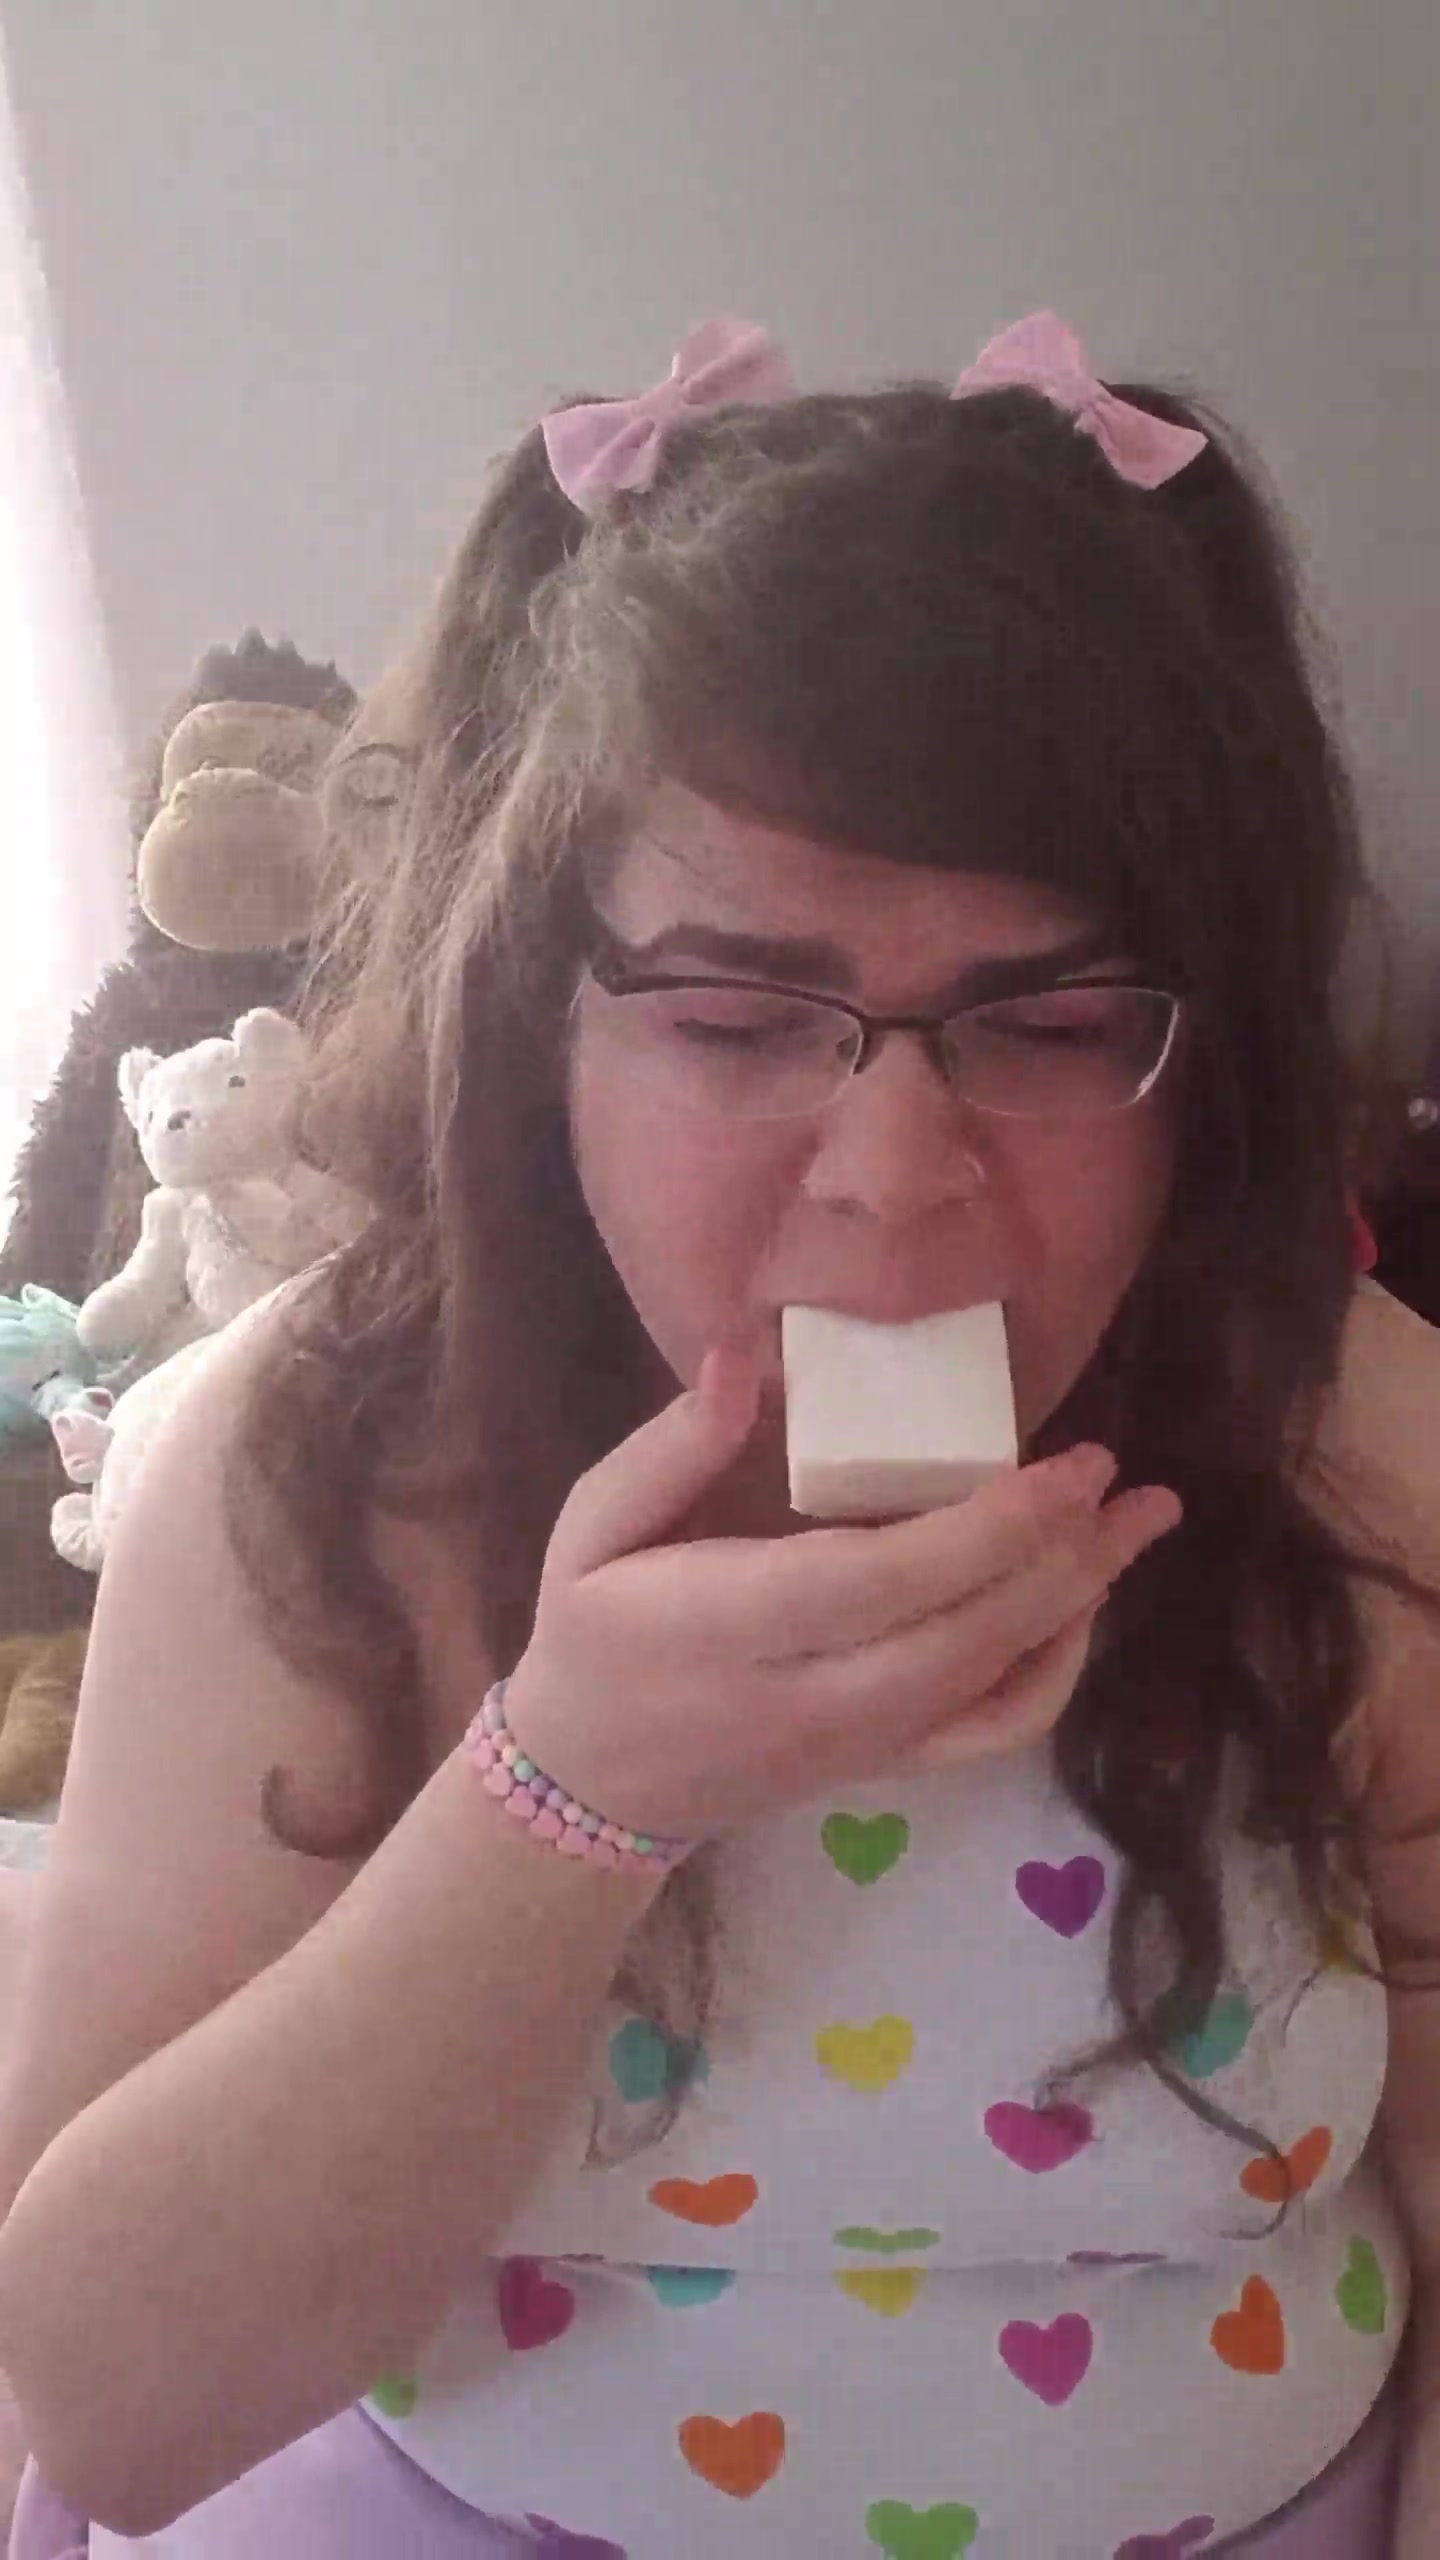 abdl girl punishes self with soap in mouth